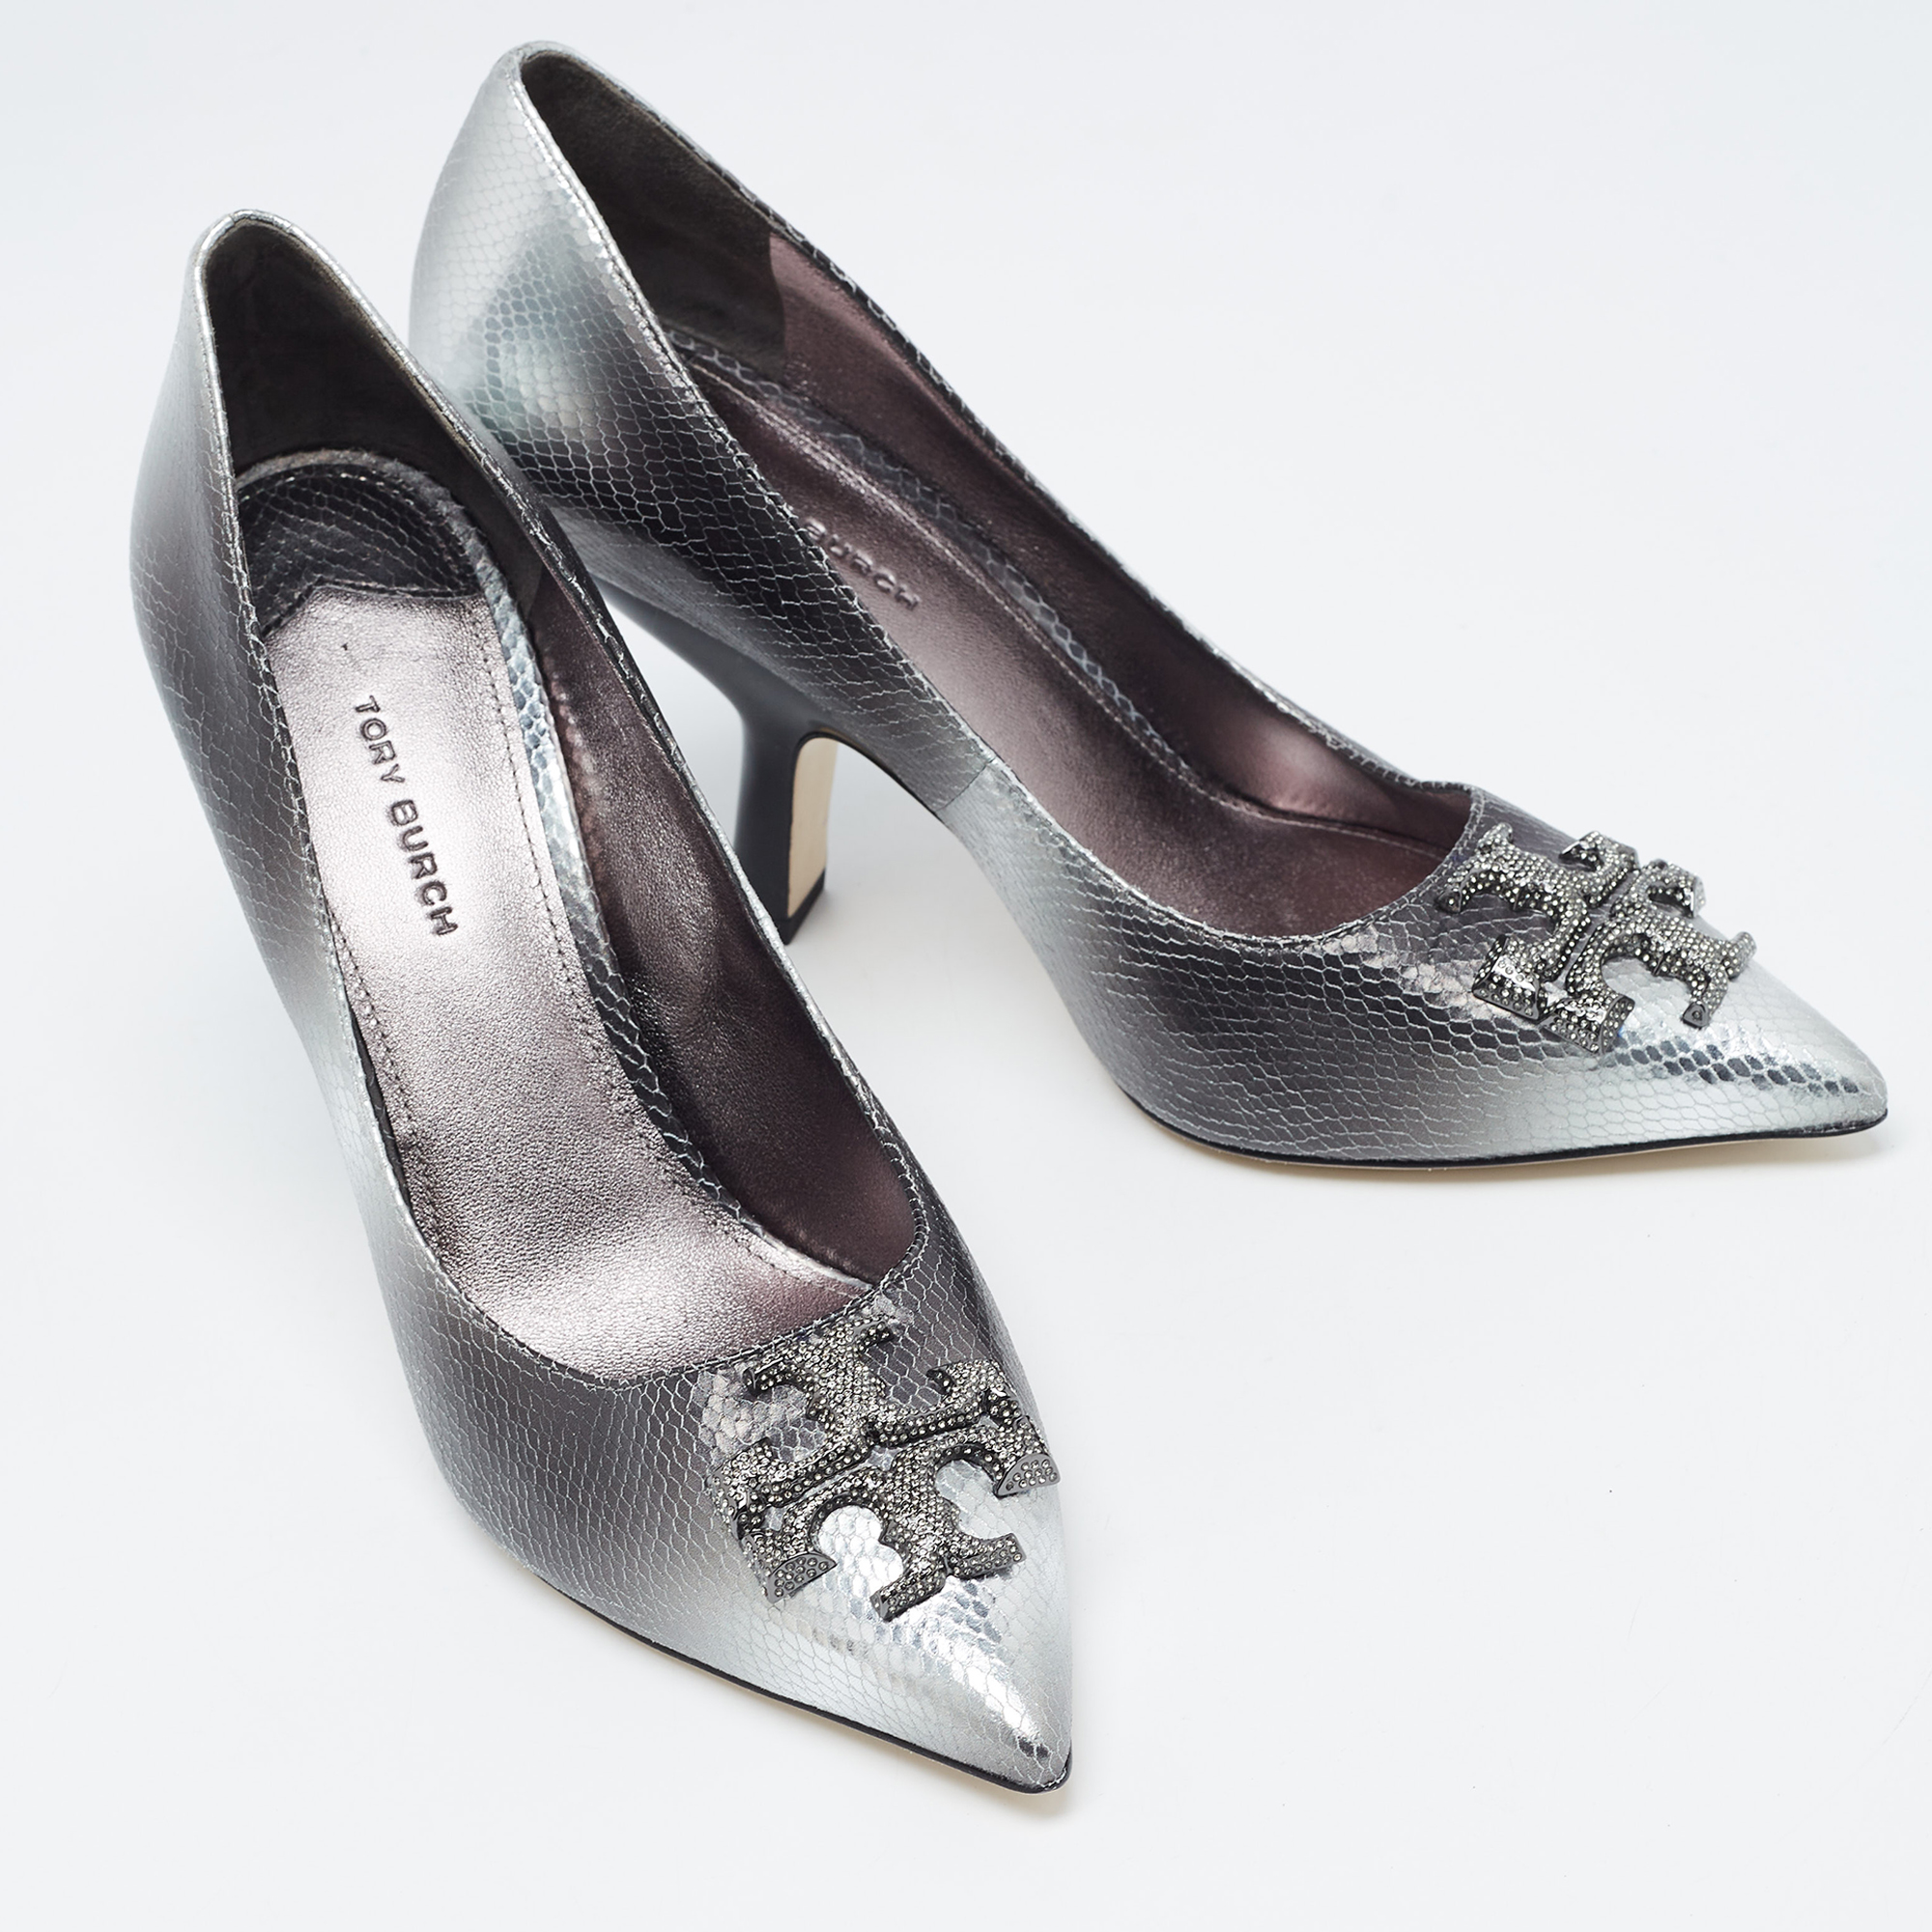 Tory Burch Silver Python Embossed Leather Logo Pumps Size 39